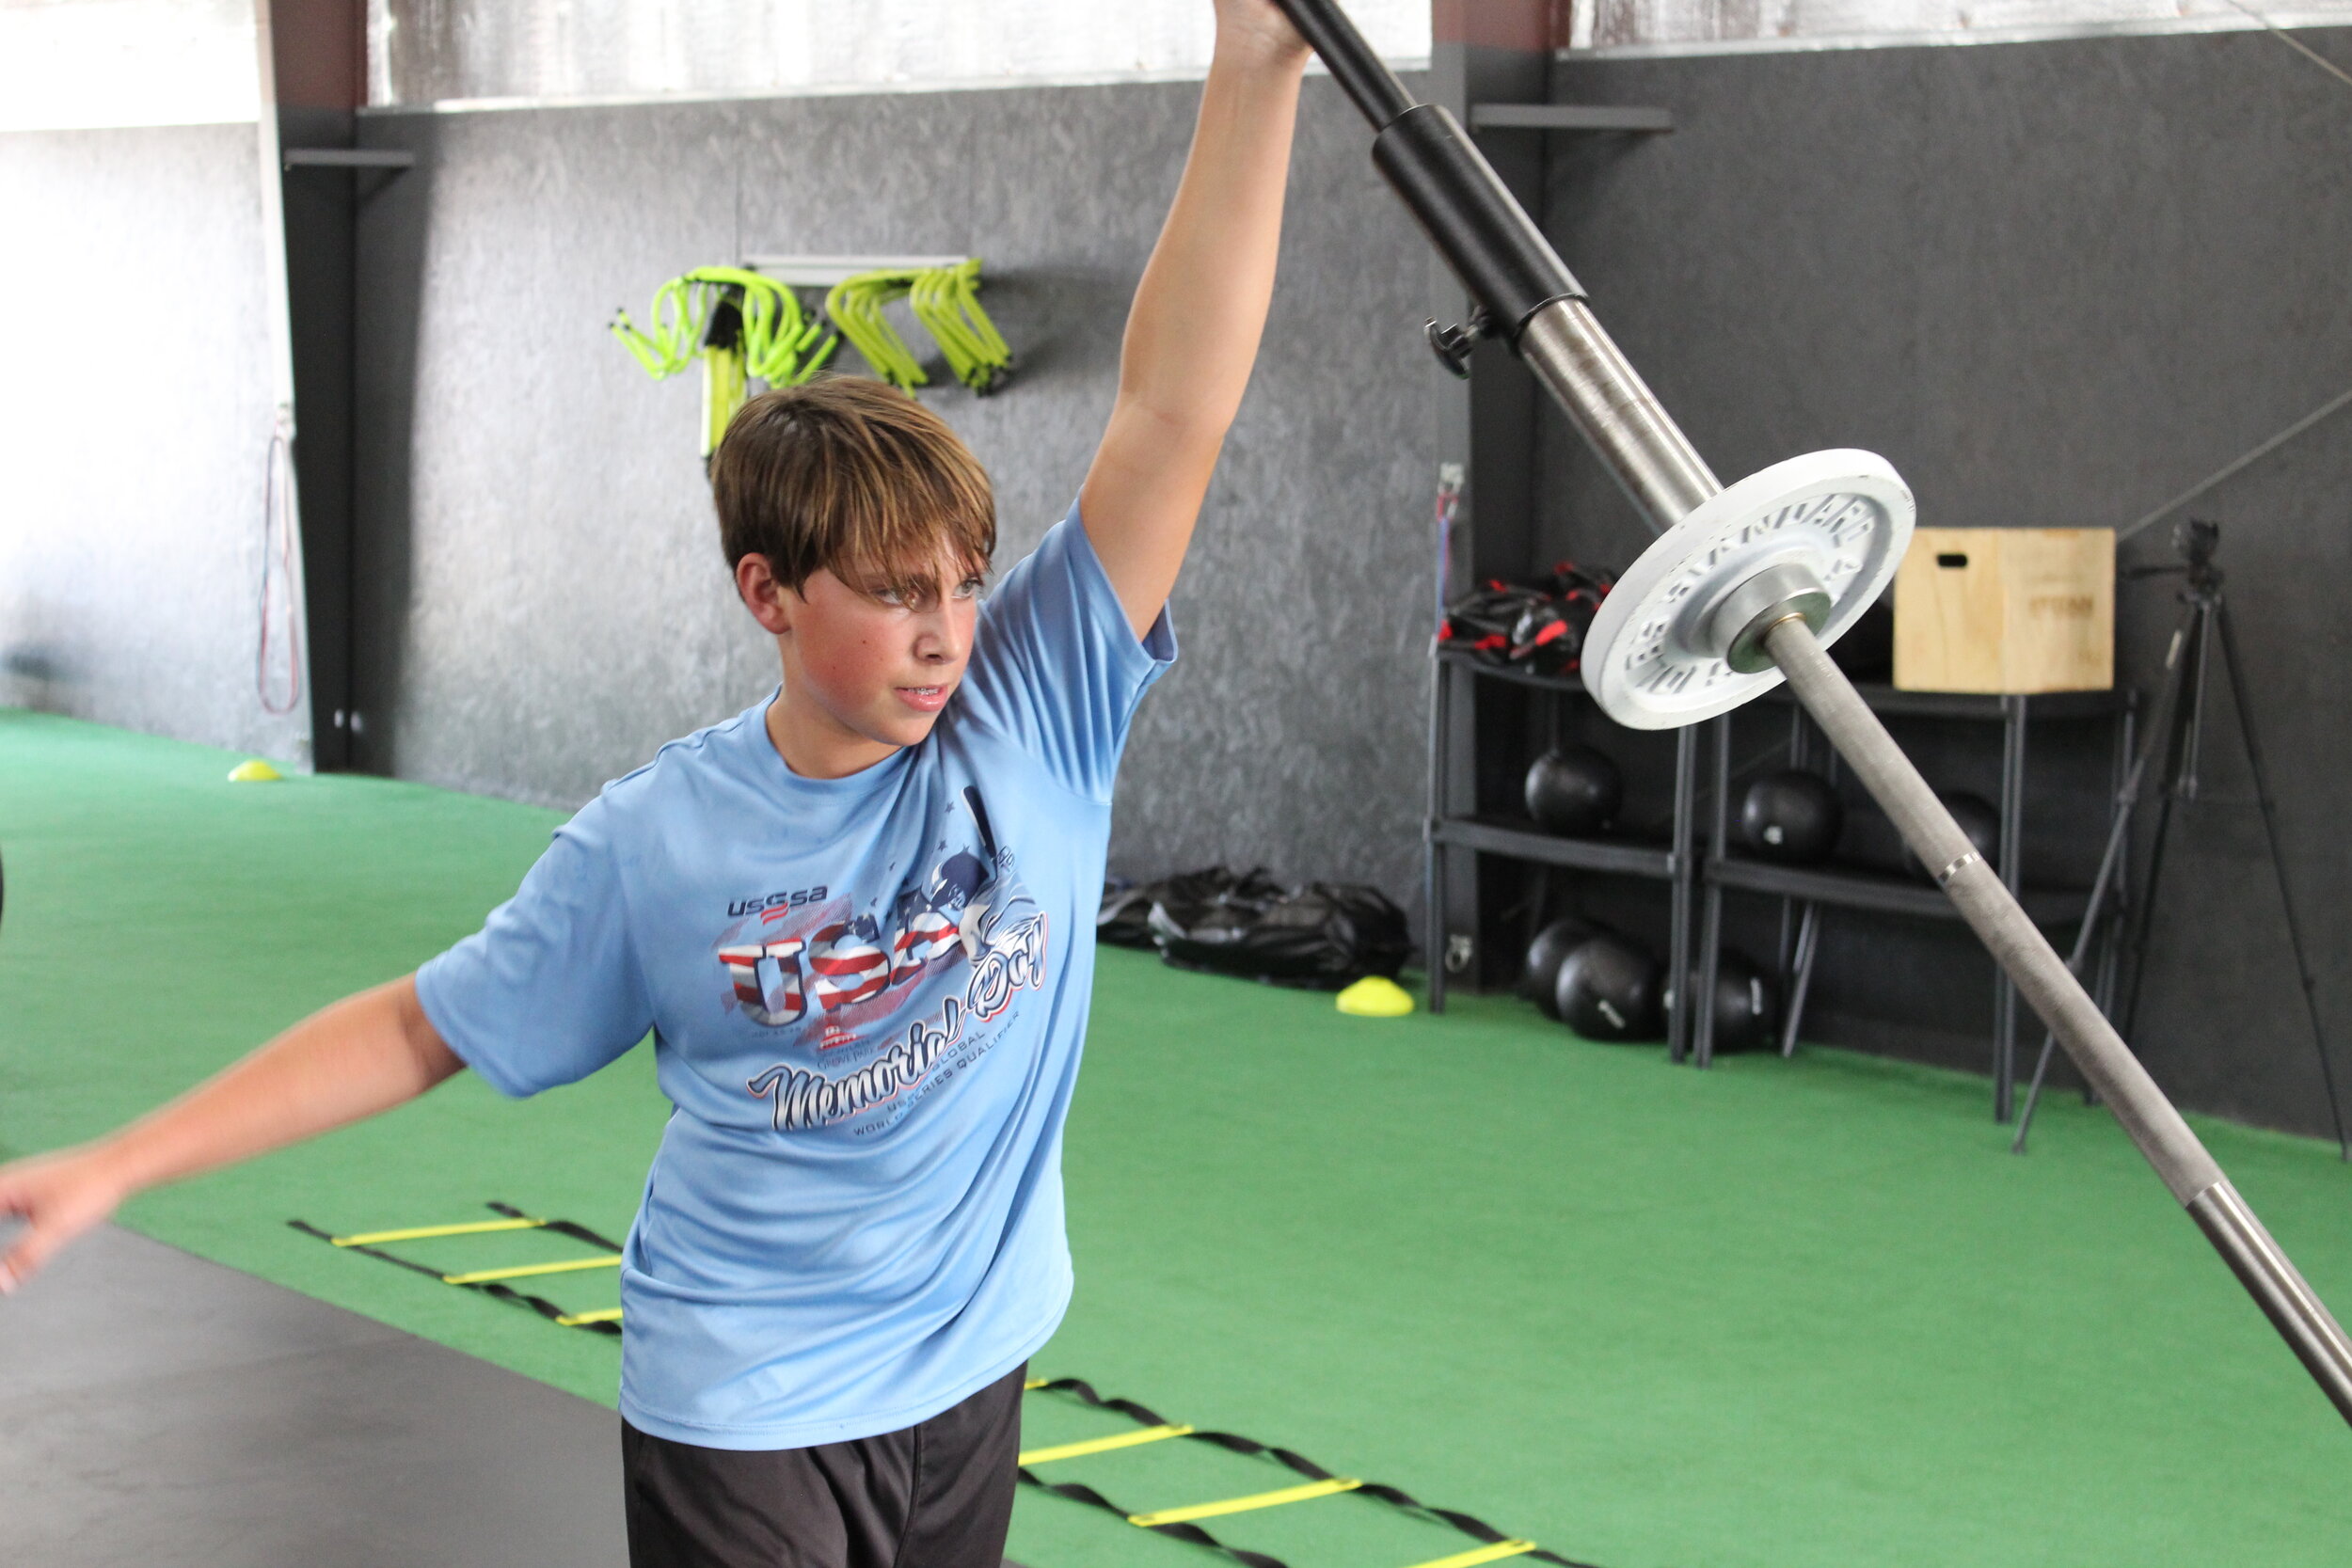 Youth sports performance